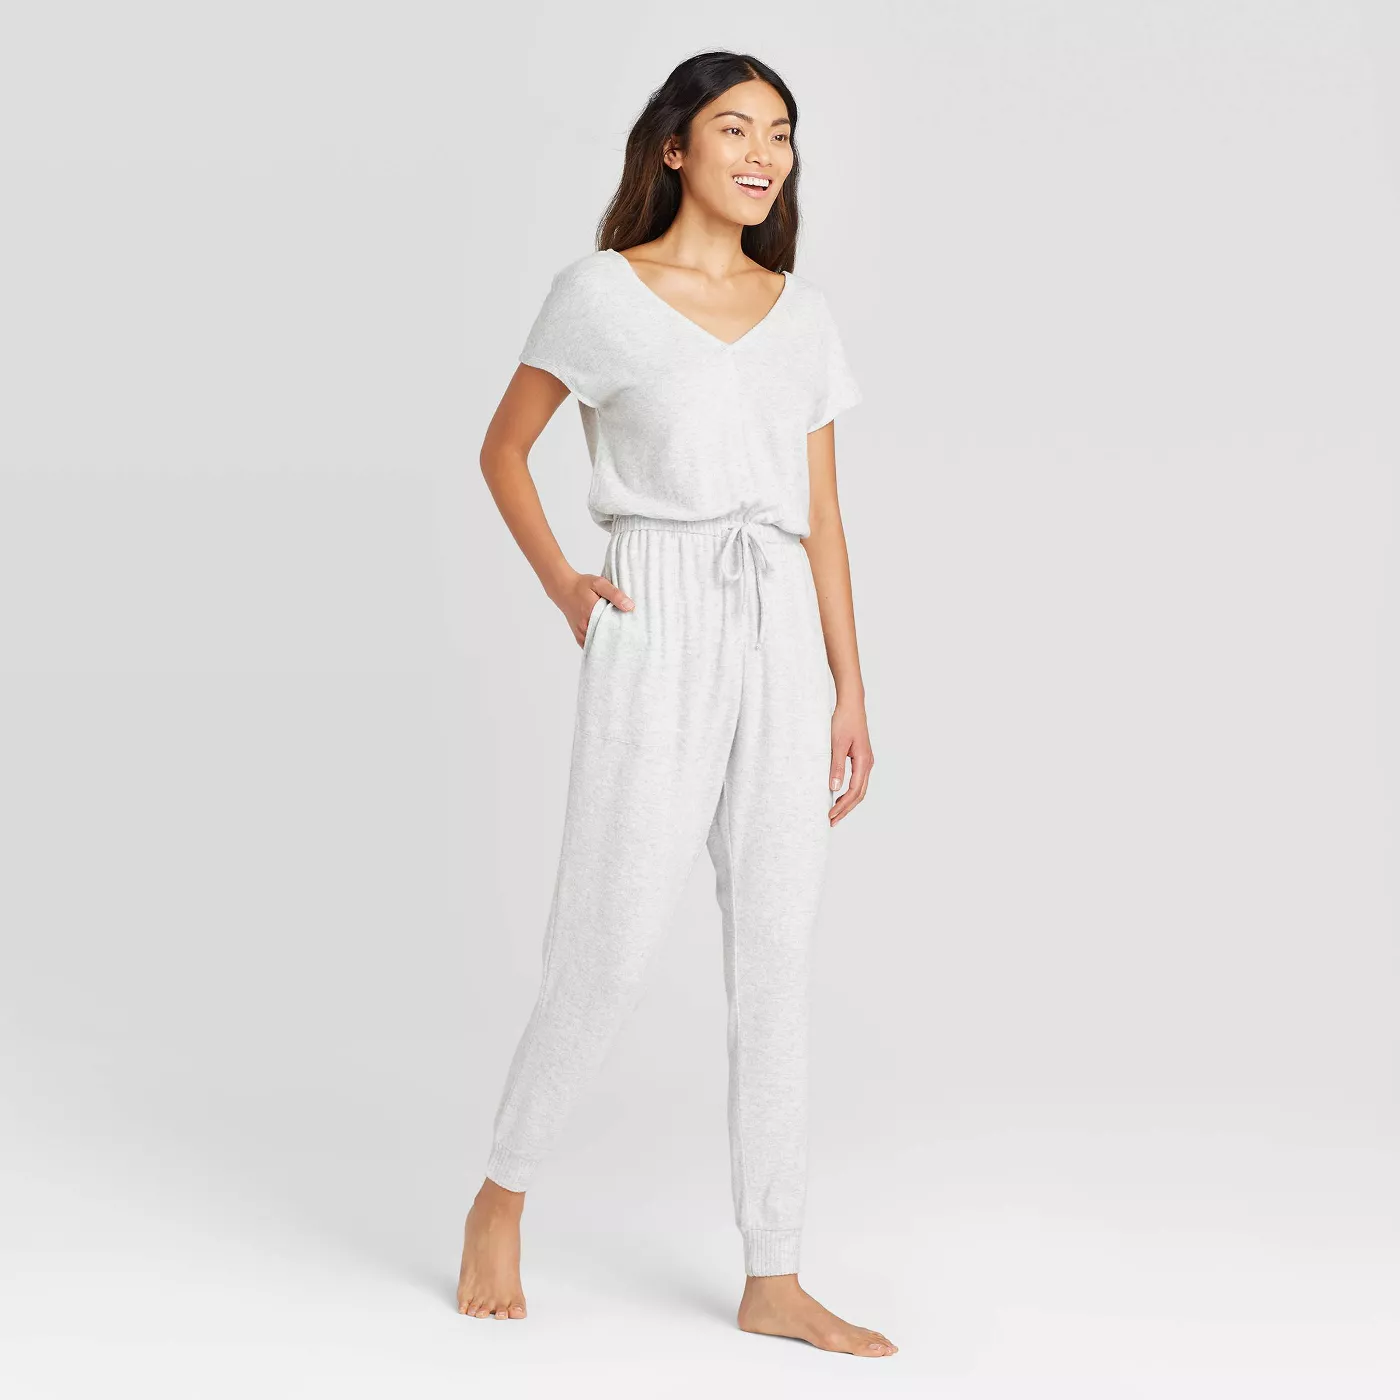 Women's Perfectly Cozy Lounge Jumpsuit - Stars Above™ - image 1 of 9